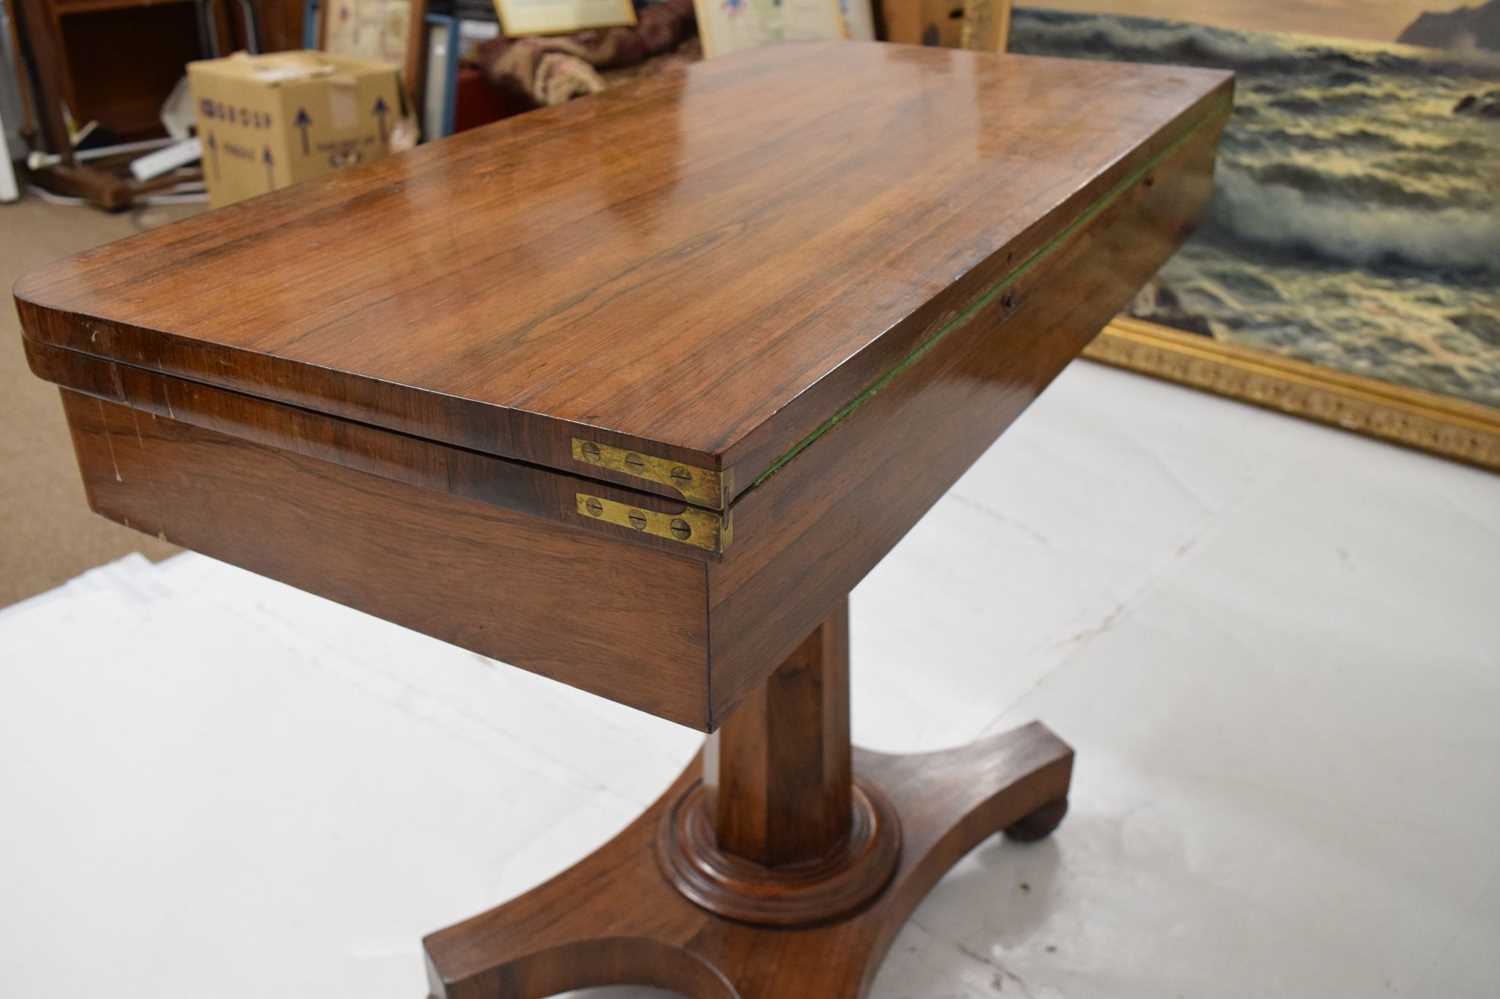 Second quarter 19th century rosewood fold-over pedestal card table - Image 5 of 10